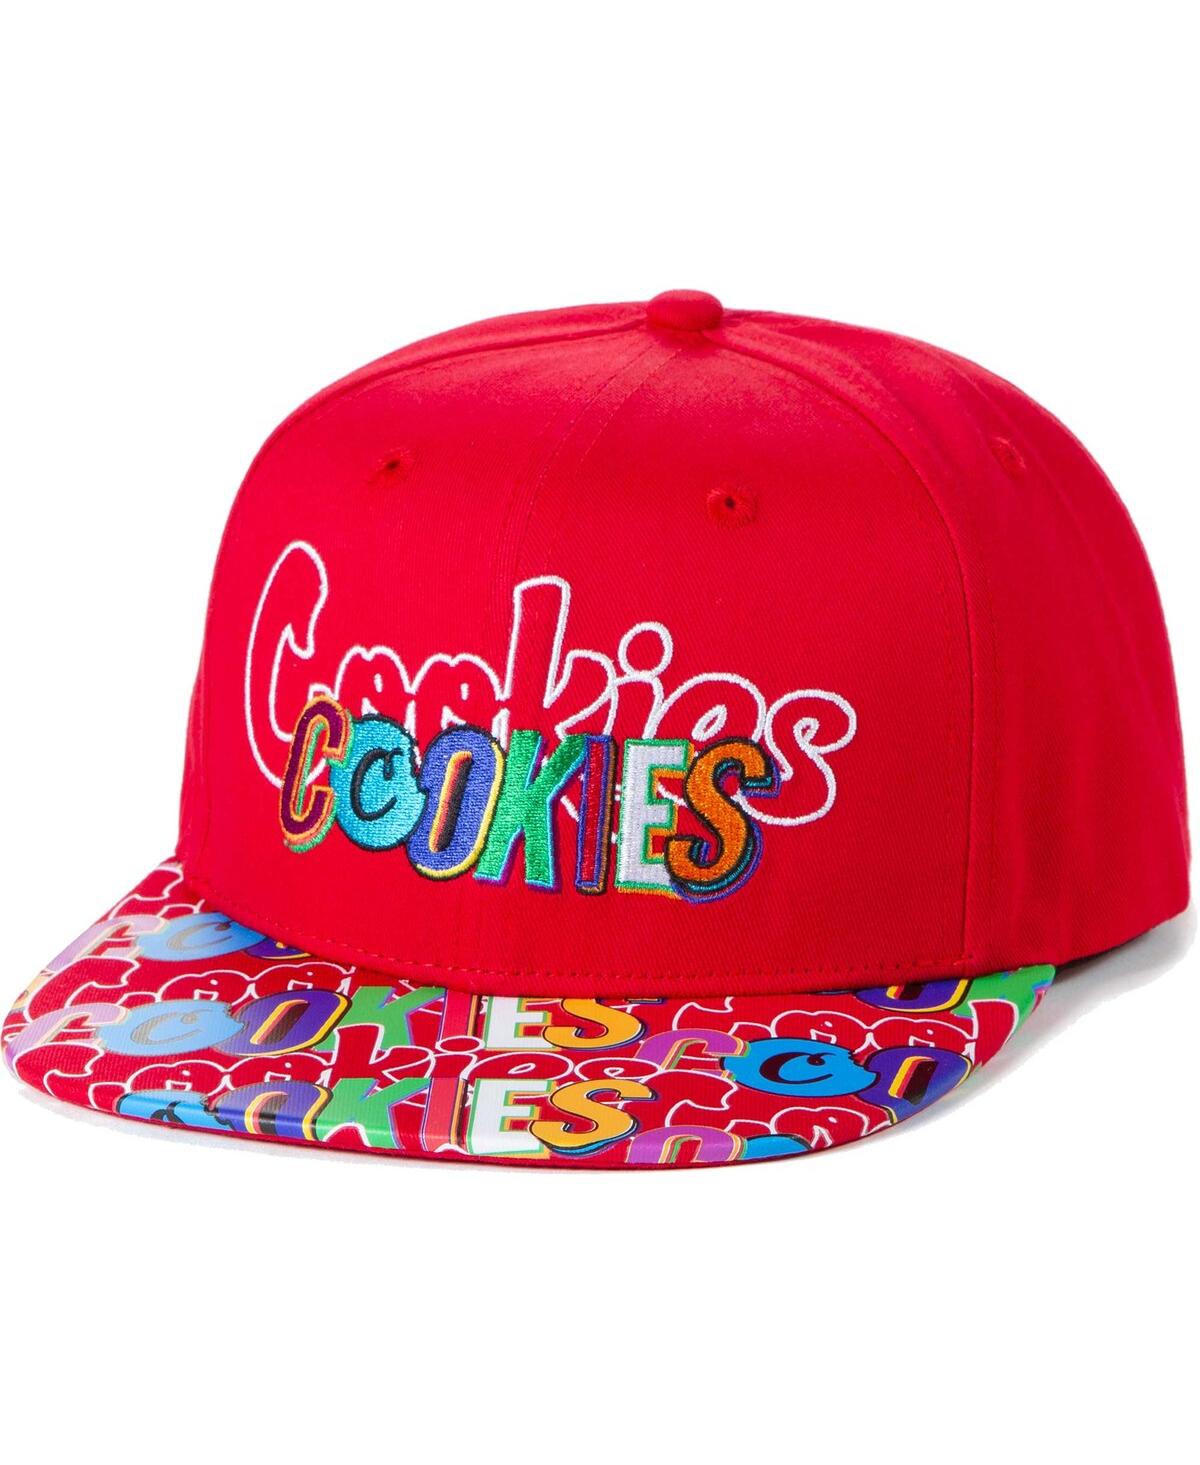 Men's Cookies Clothing Red On The Block Snapback Hat - Red